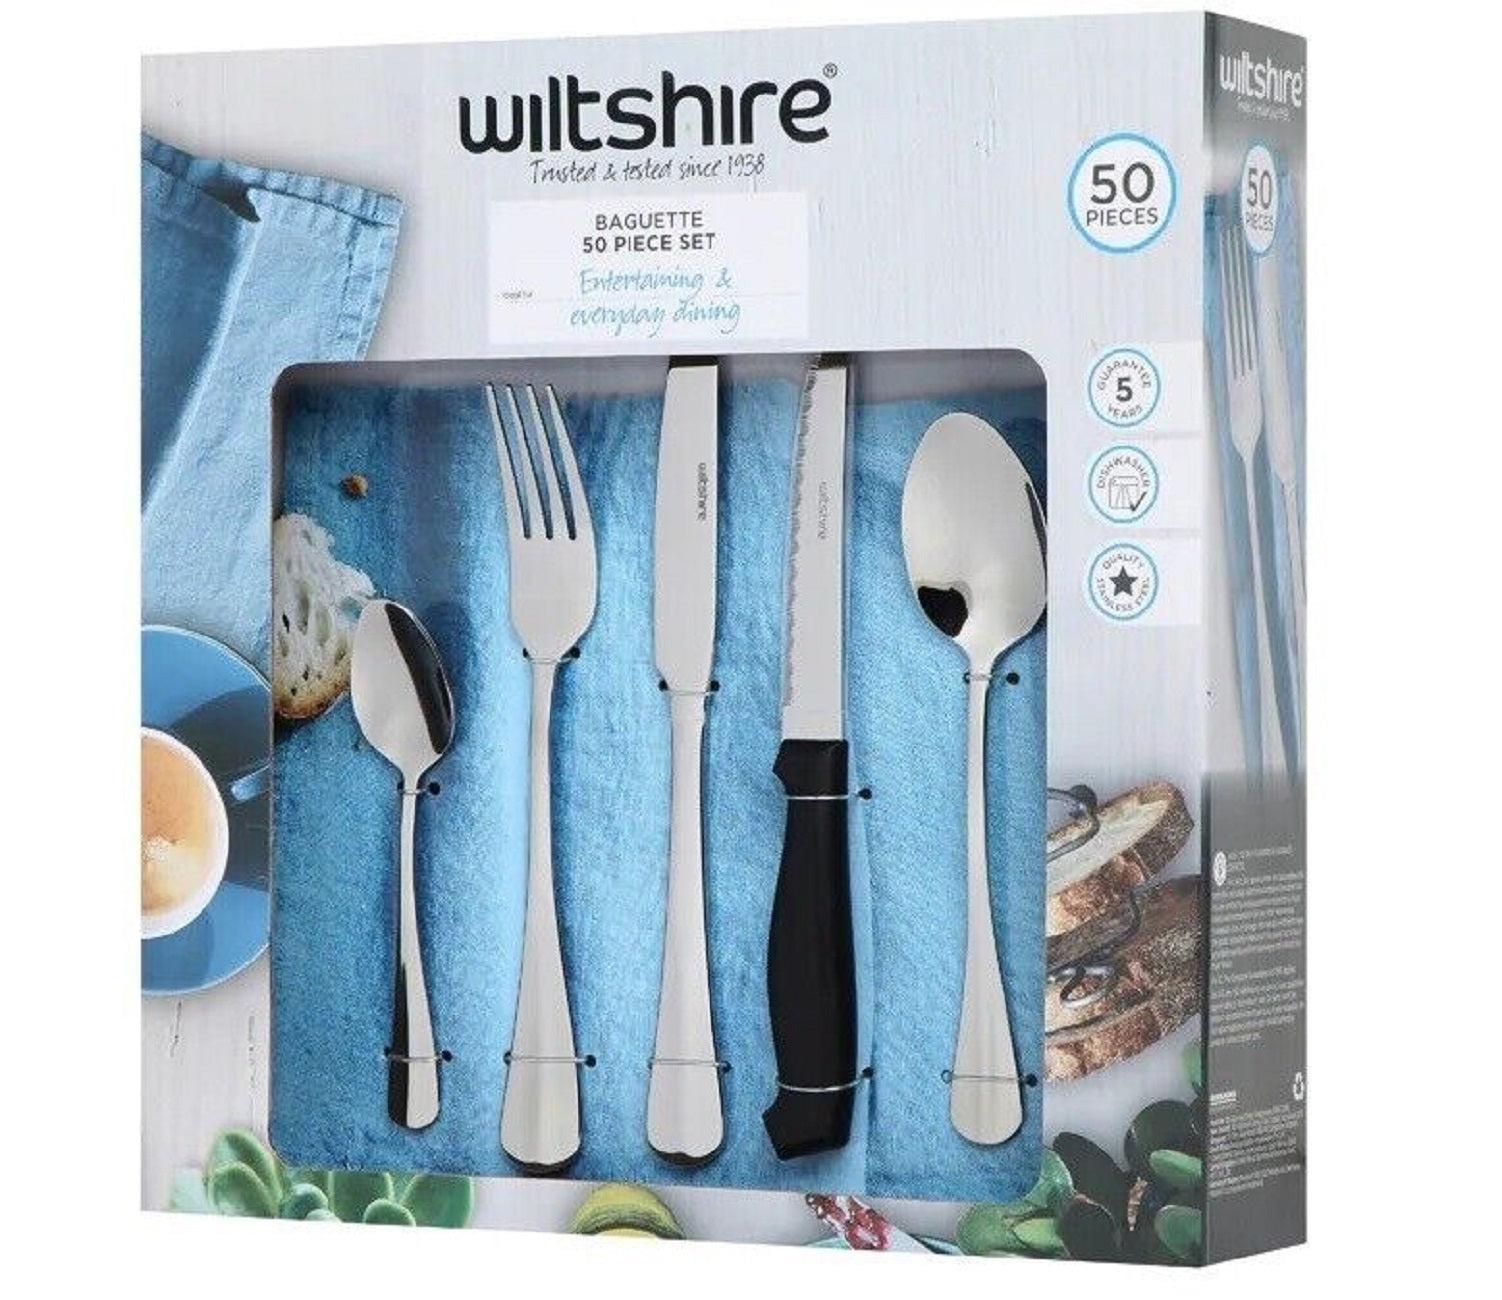 50pcs Wiltshire Baguette Cutlery Stainless Steel Dining Utensils Kit